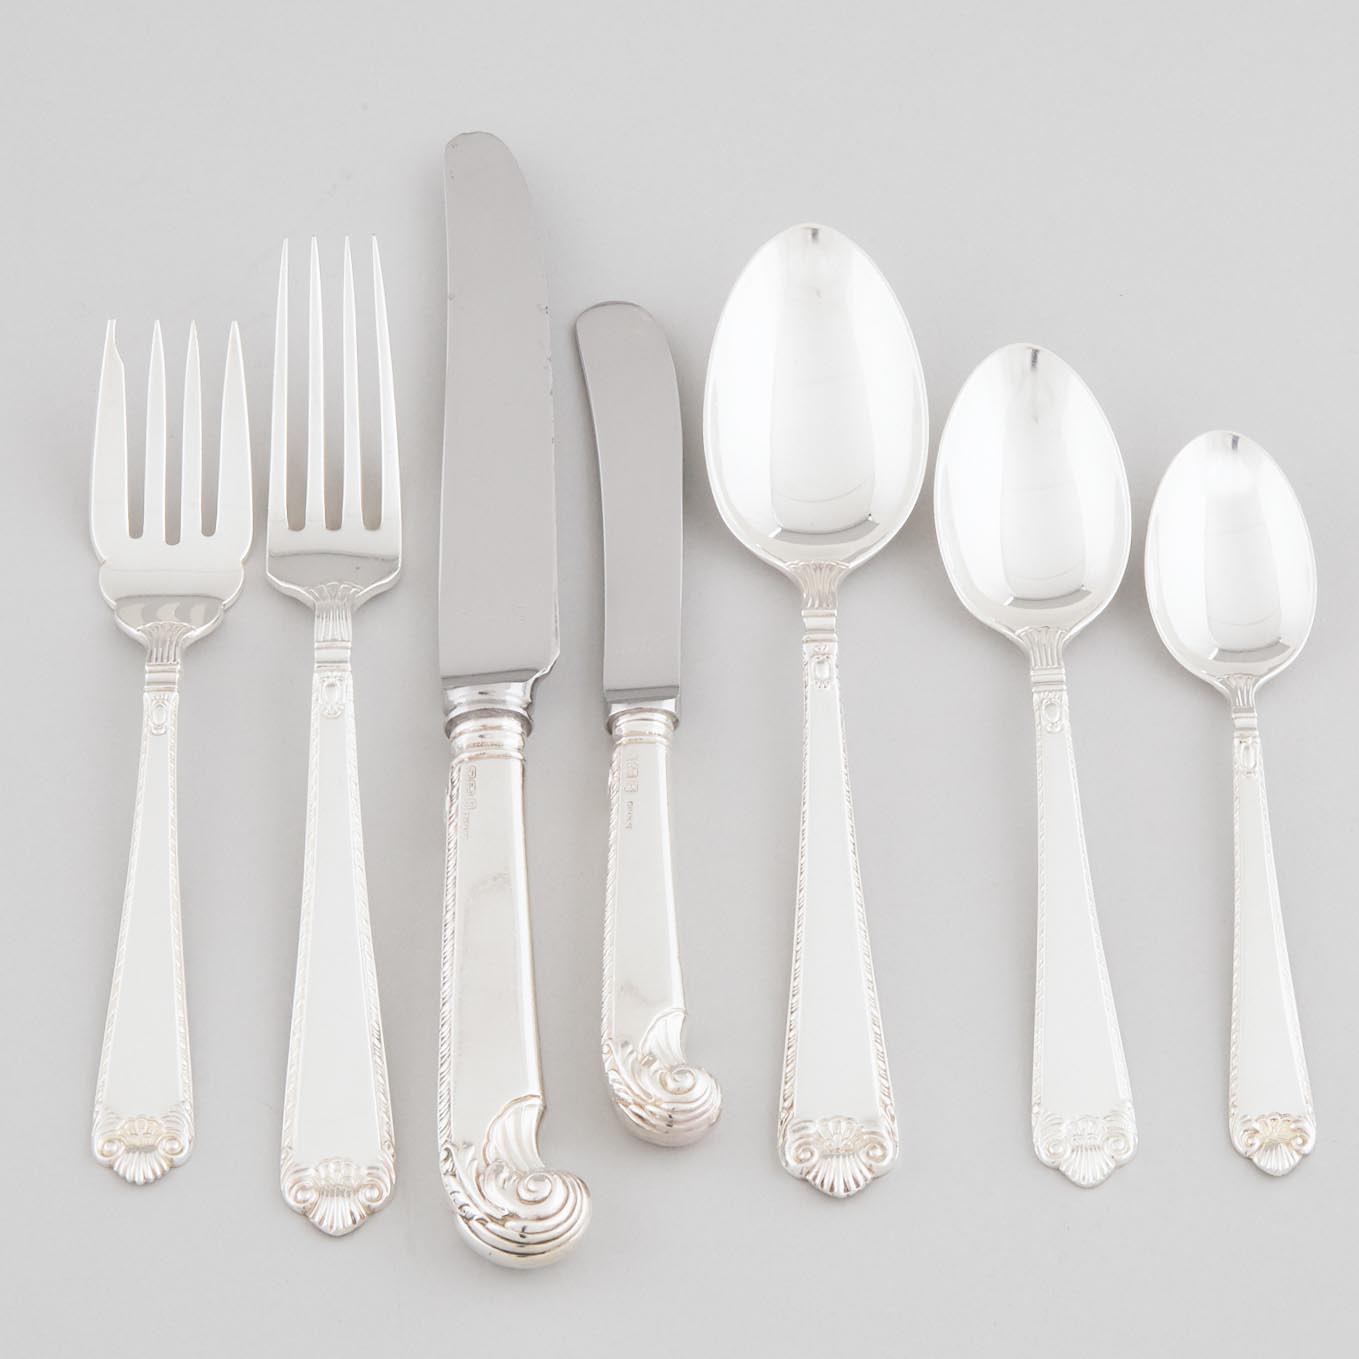 Canadian Silver 'George II Plain' Pattern Flatware Service, Henry Birks & Sons, Montreal Que., 20th century